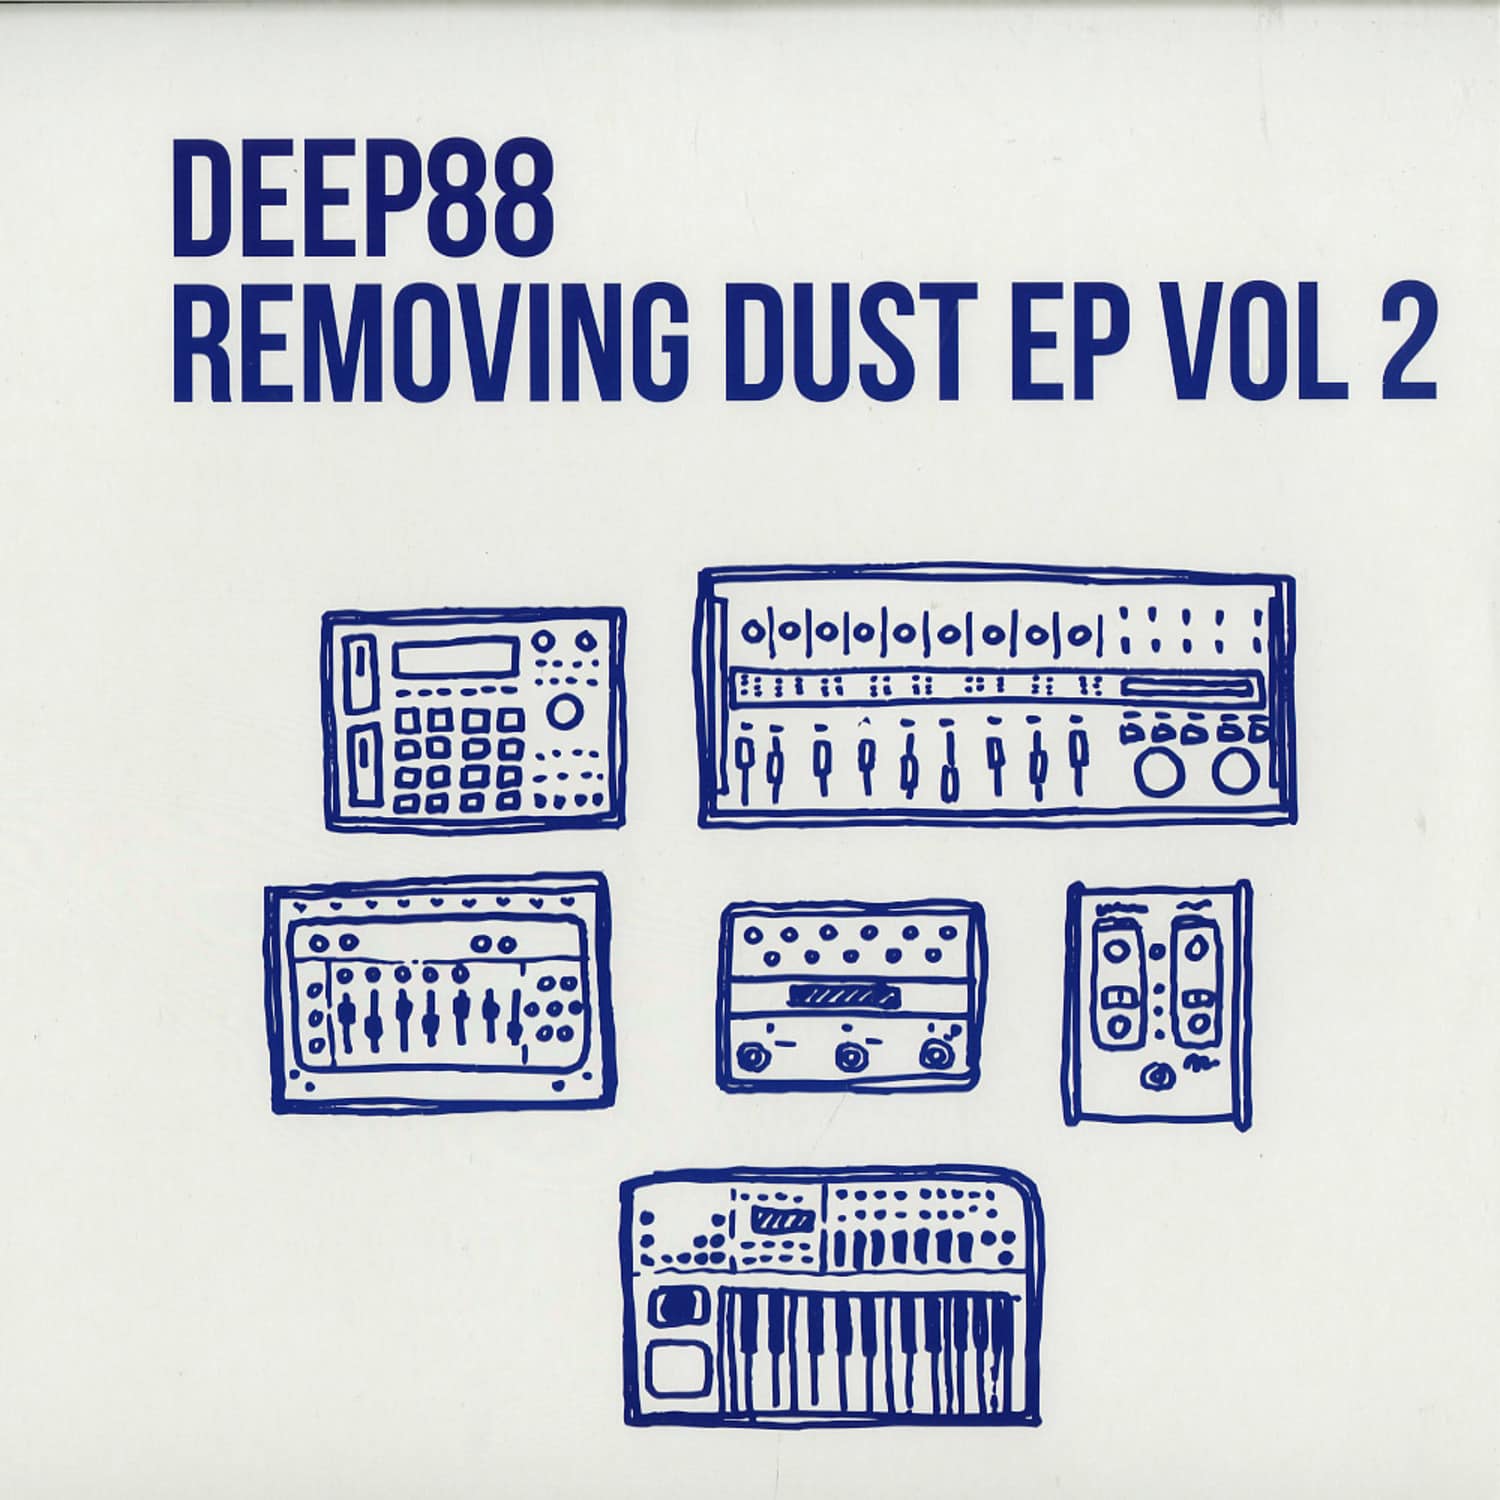 Deep88 - REMOVING DUST EP VOL.2